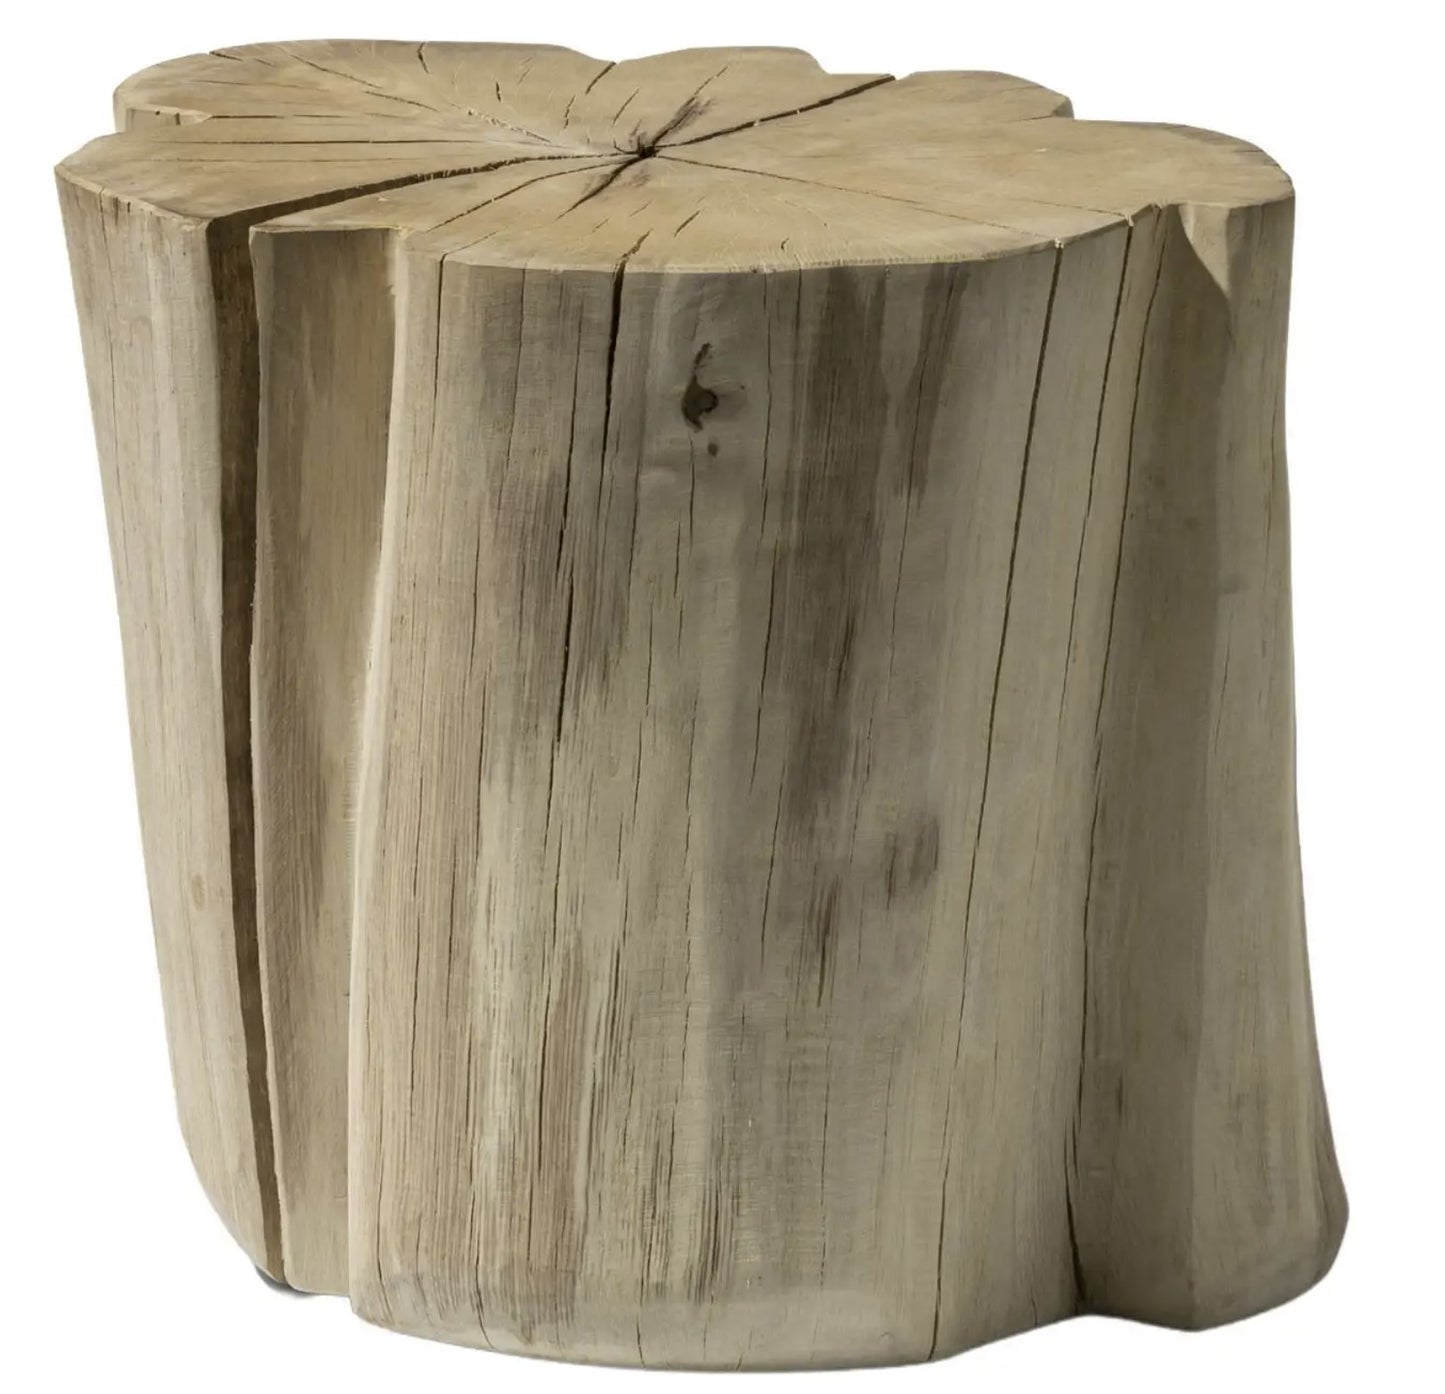 Large Brick Side Table in Natural Barked Hornbeam Trunk - $1,030.00